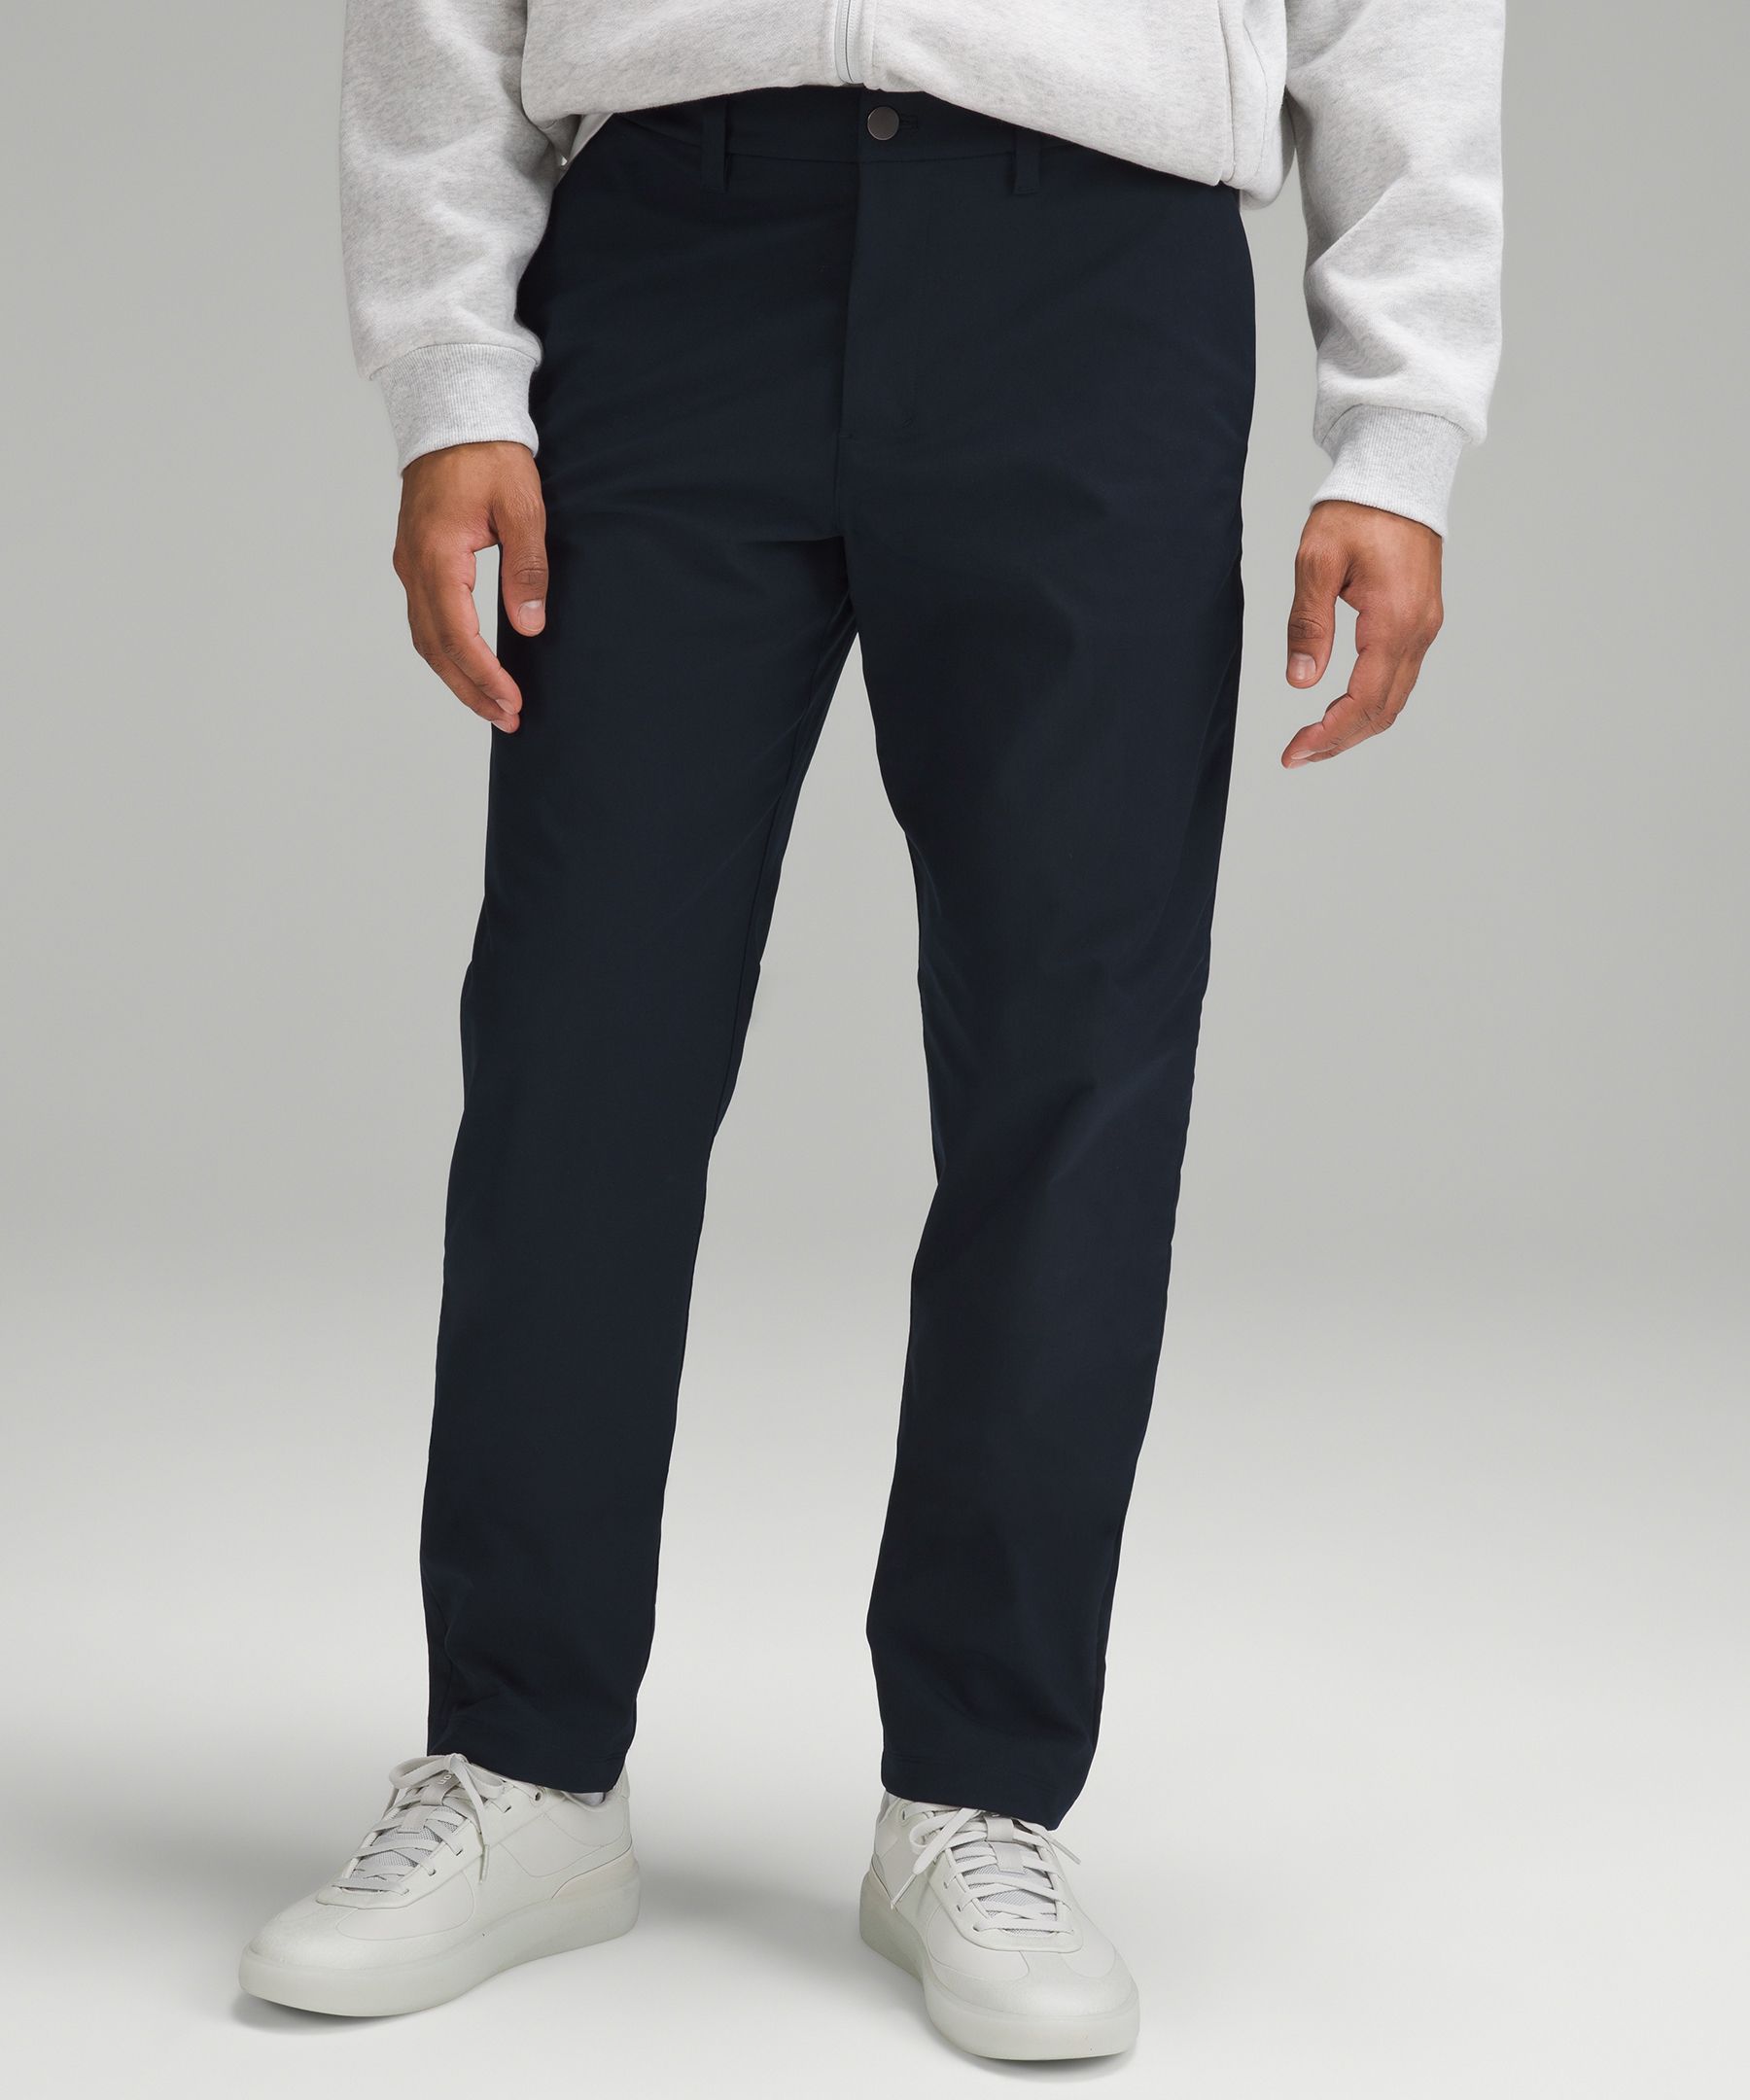 ABC Classic-Fit Trouser 34L *Smooth Twill, Men's Trousers